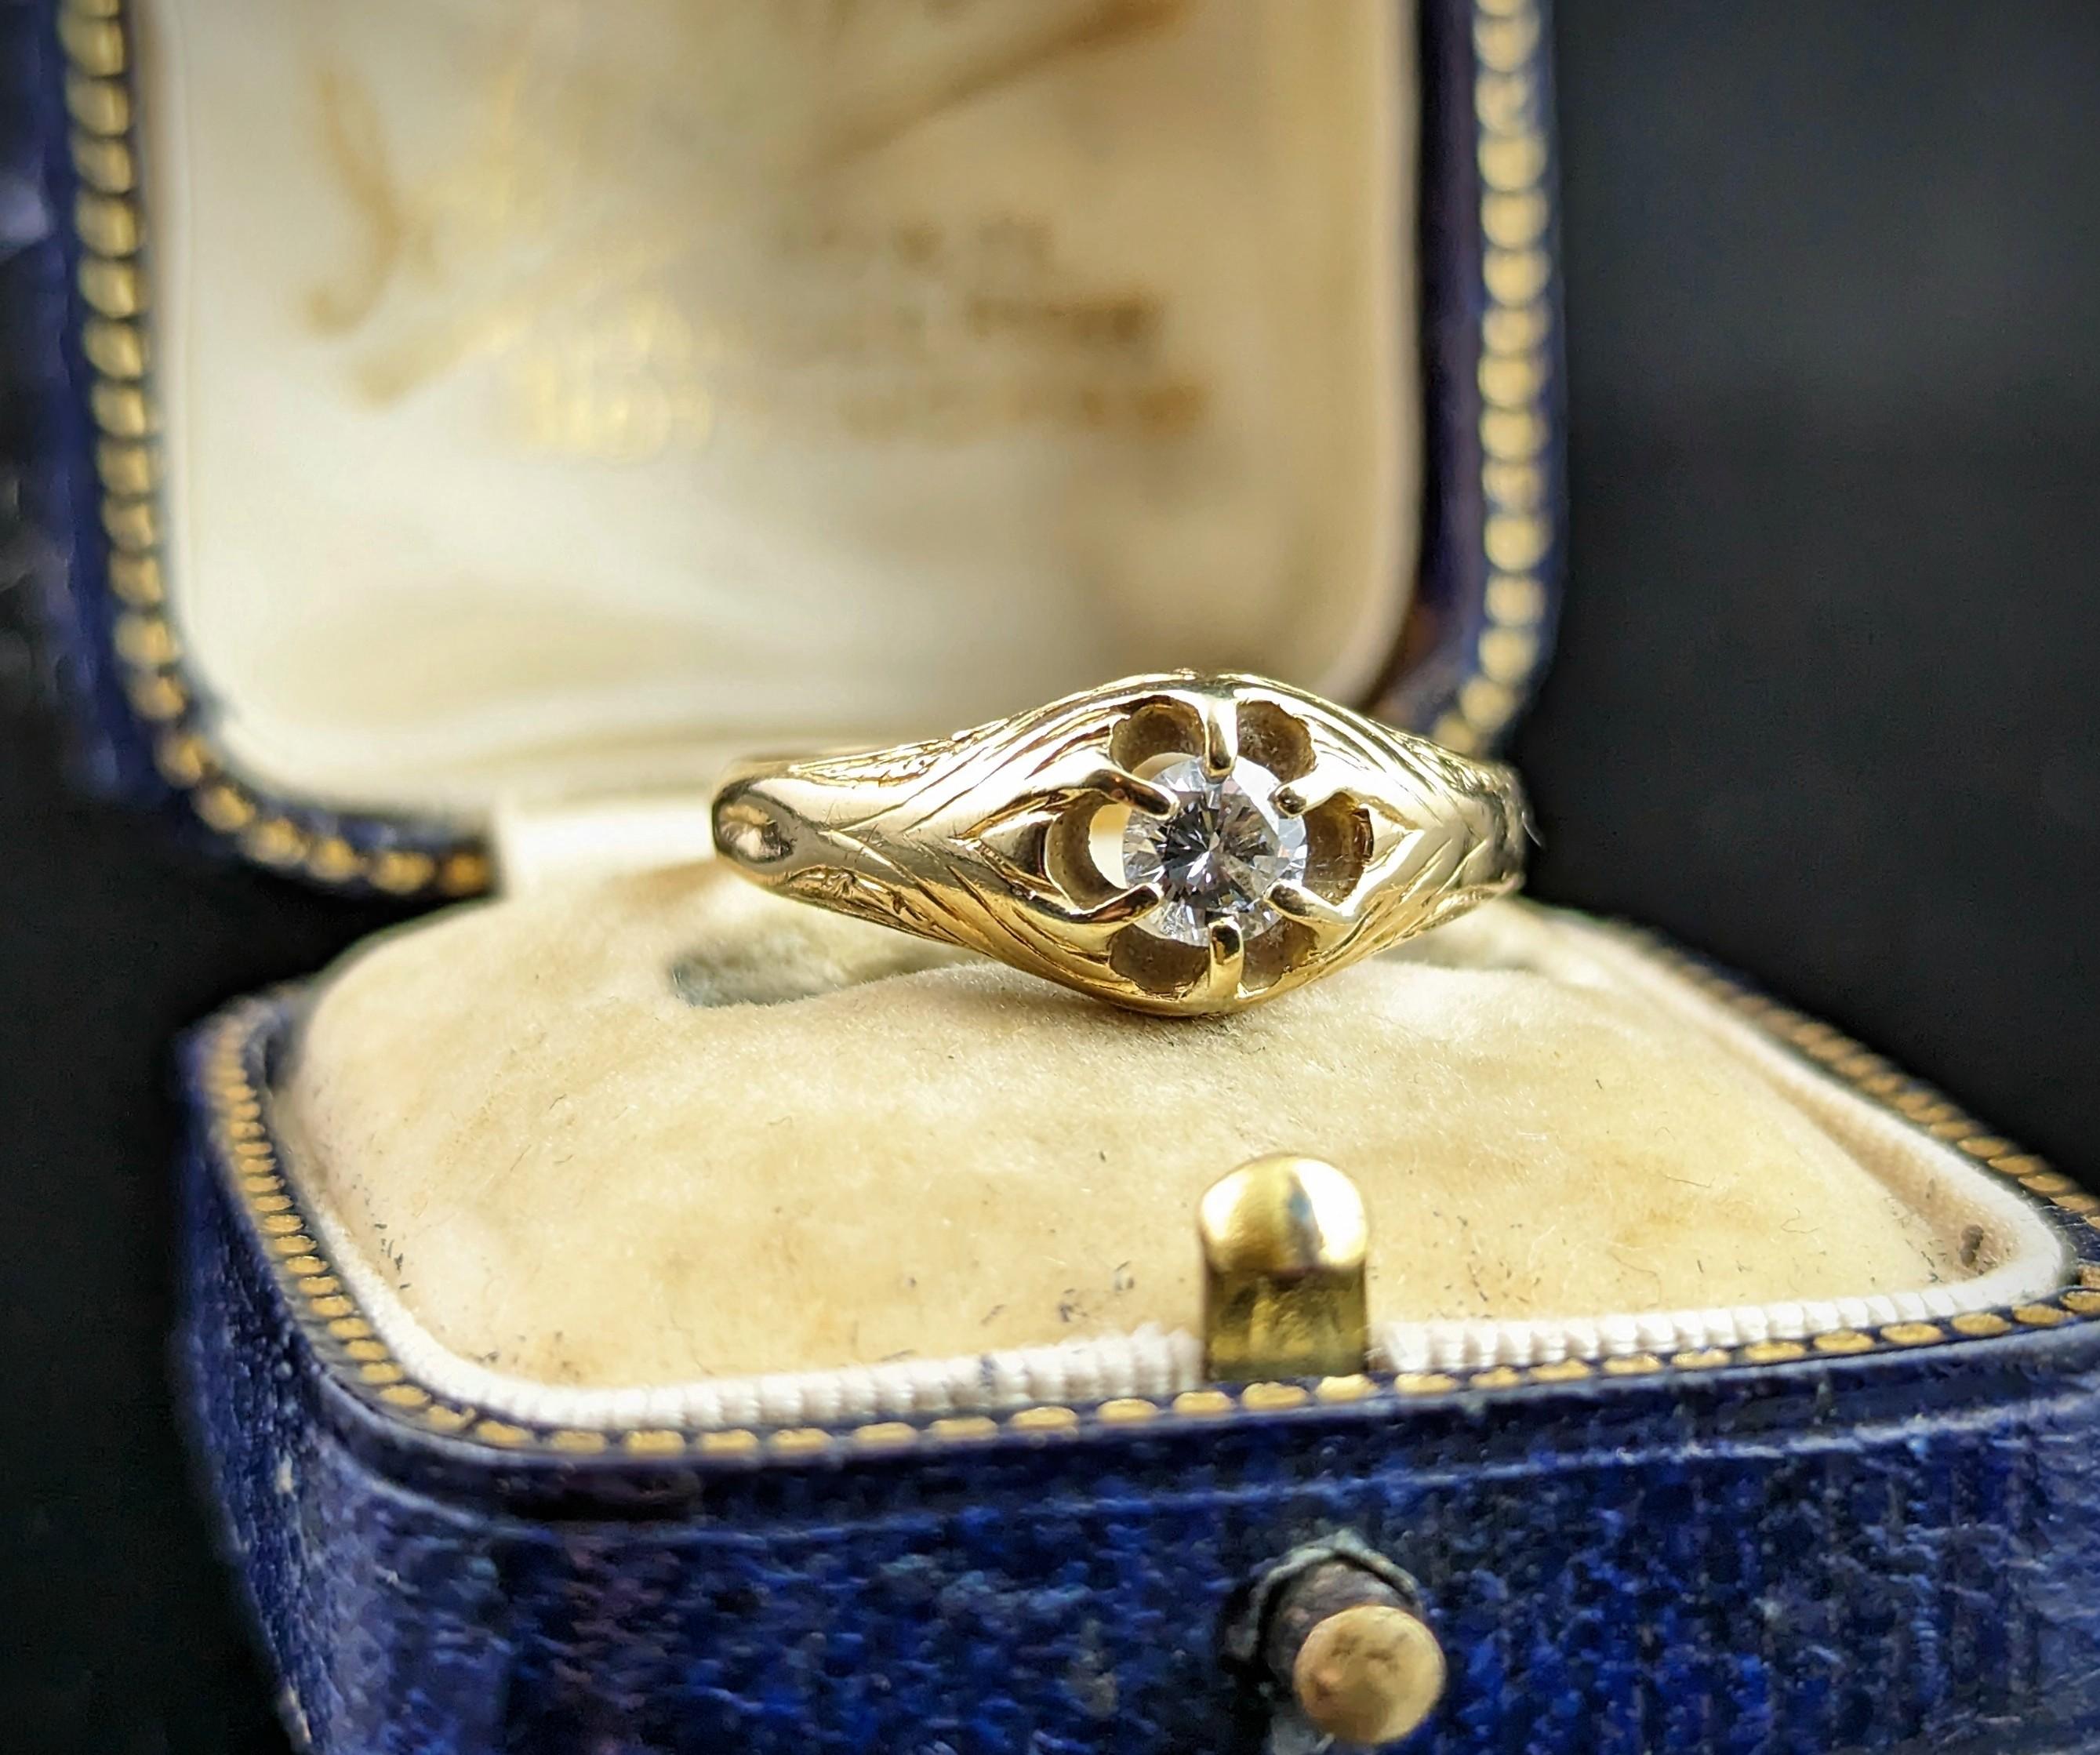 This beautiful antique 18kt gold diamond solitaire ring really shines.

A handsome piece set into rich 18kt yellow gold with ornately engraved chunky shoulders, the face housing a twinkling white brilliant cut diamond, claw set with gold prongs.

It